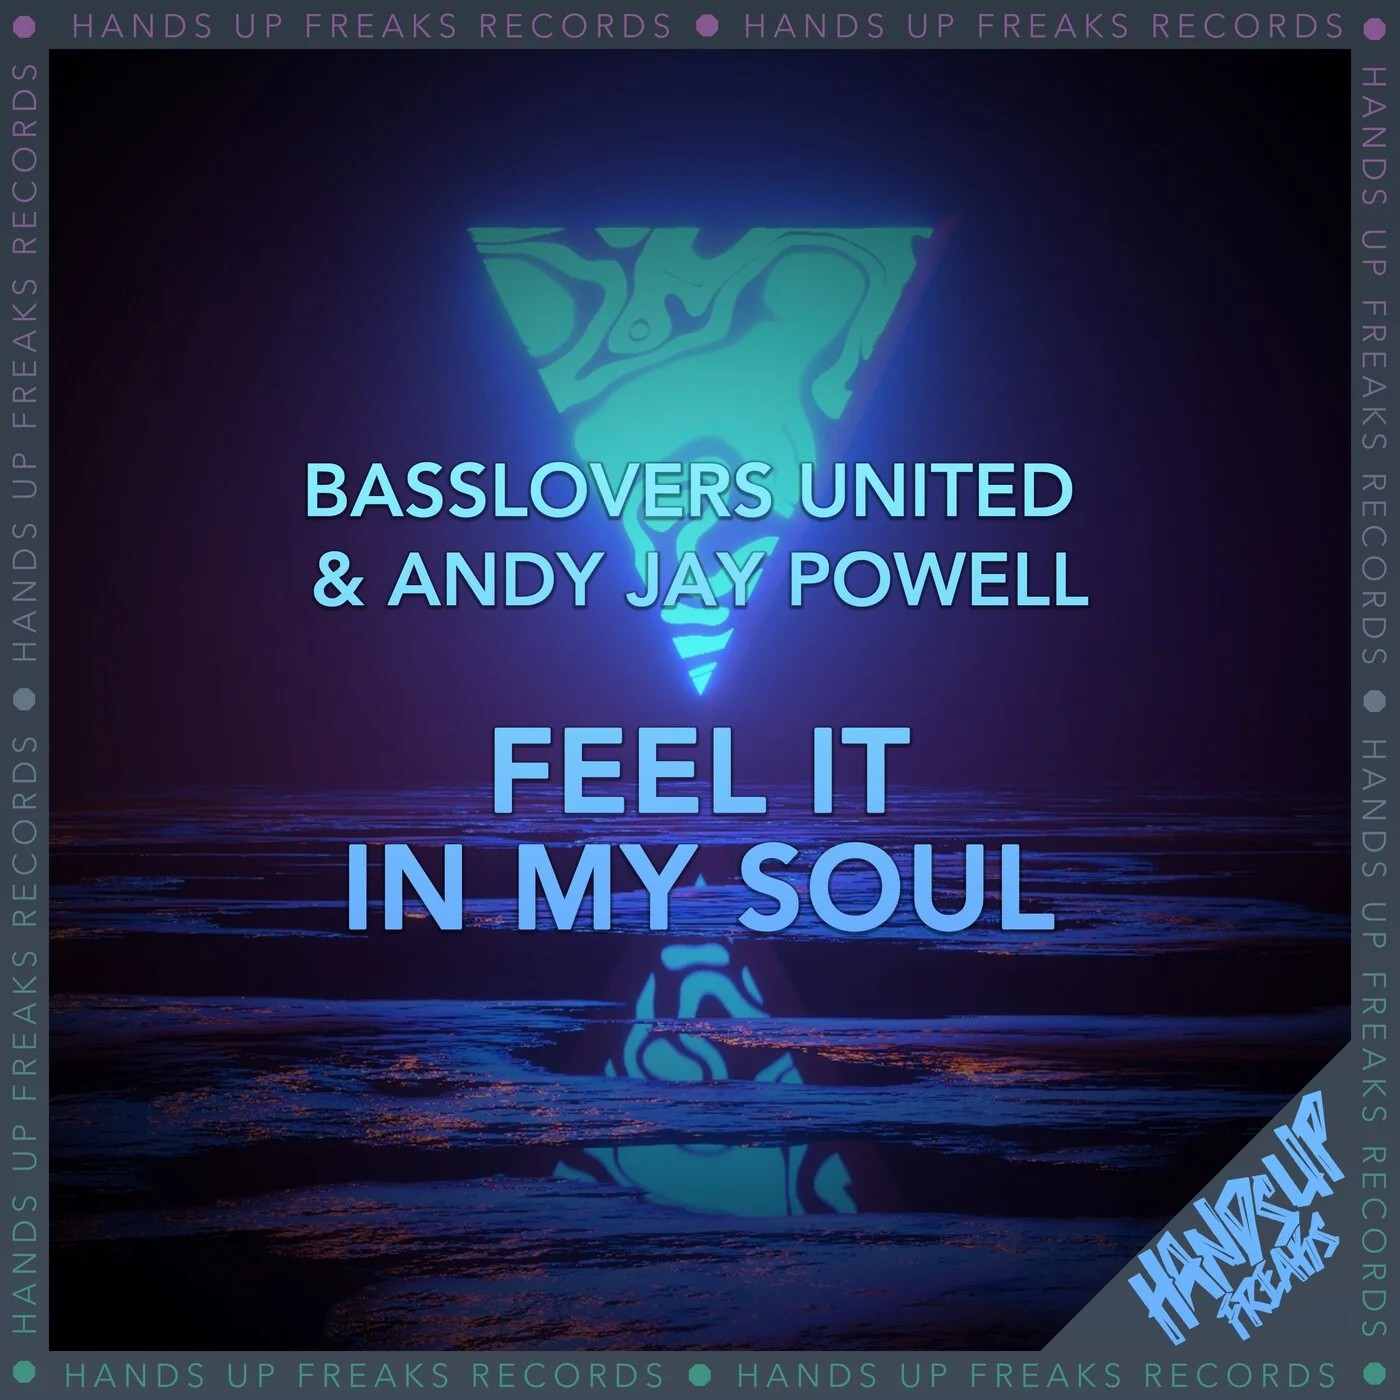 Basslovers United & Andy Jay Powell - Feel It in My Soul